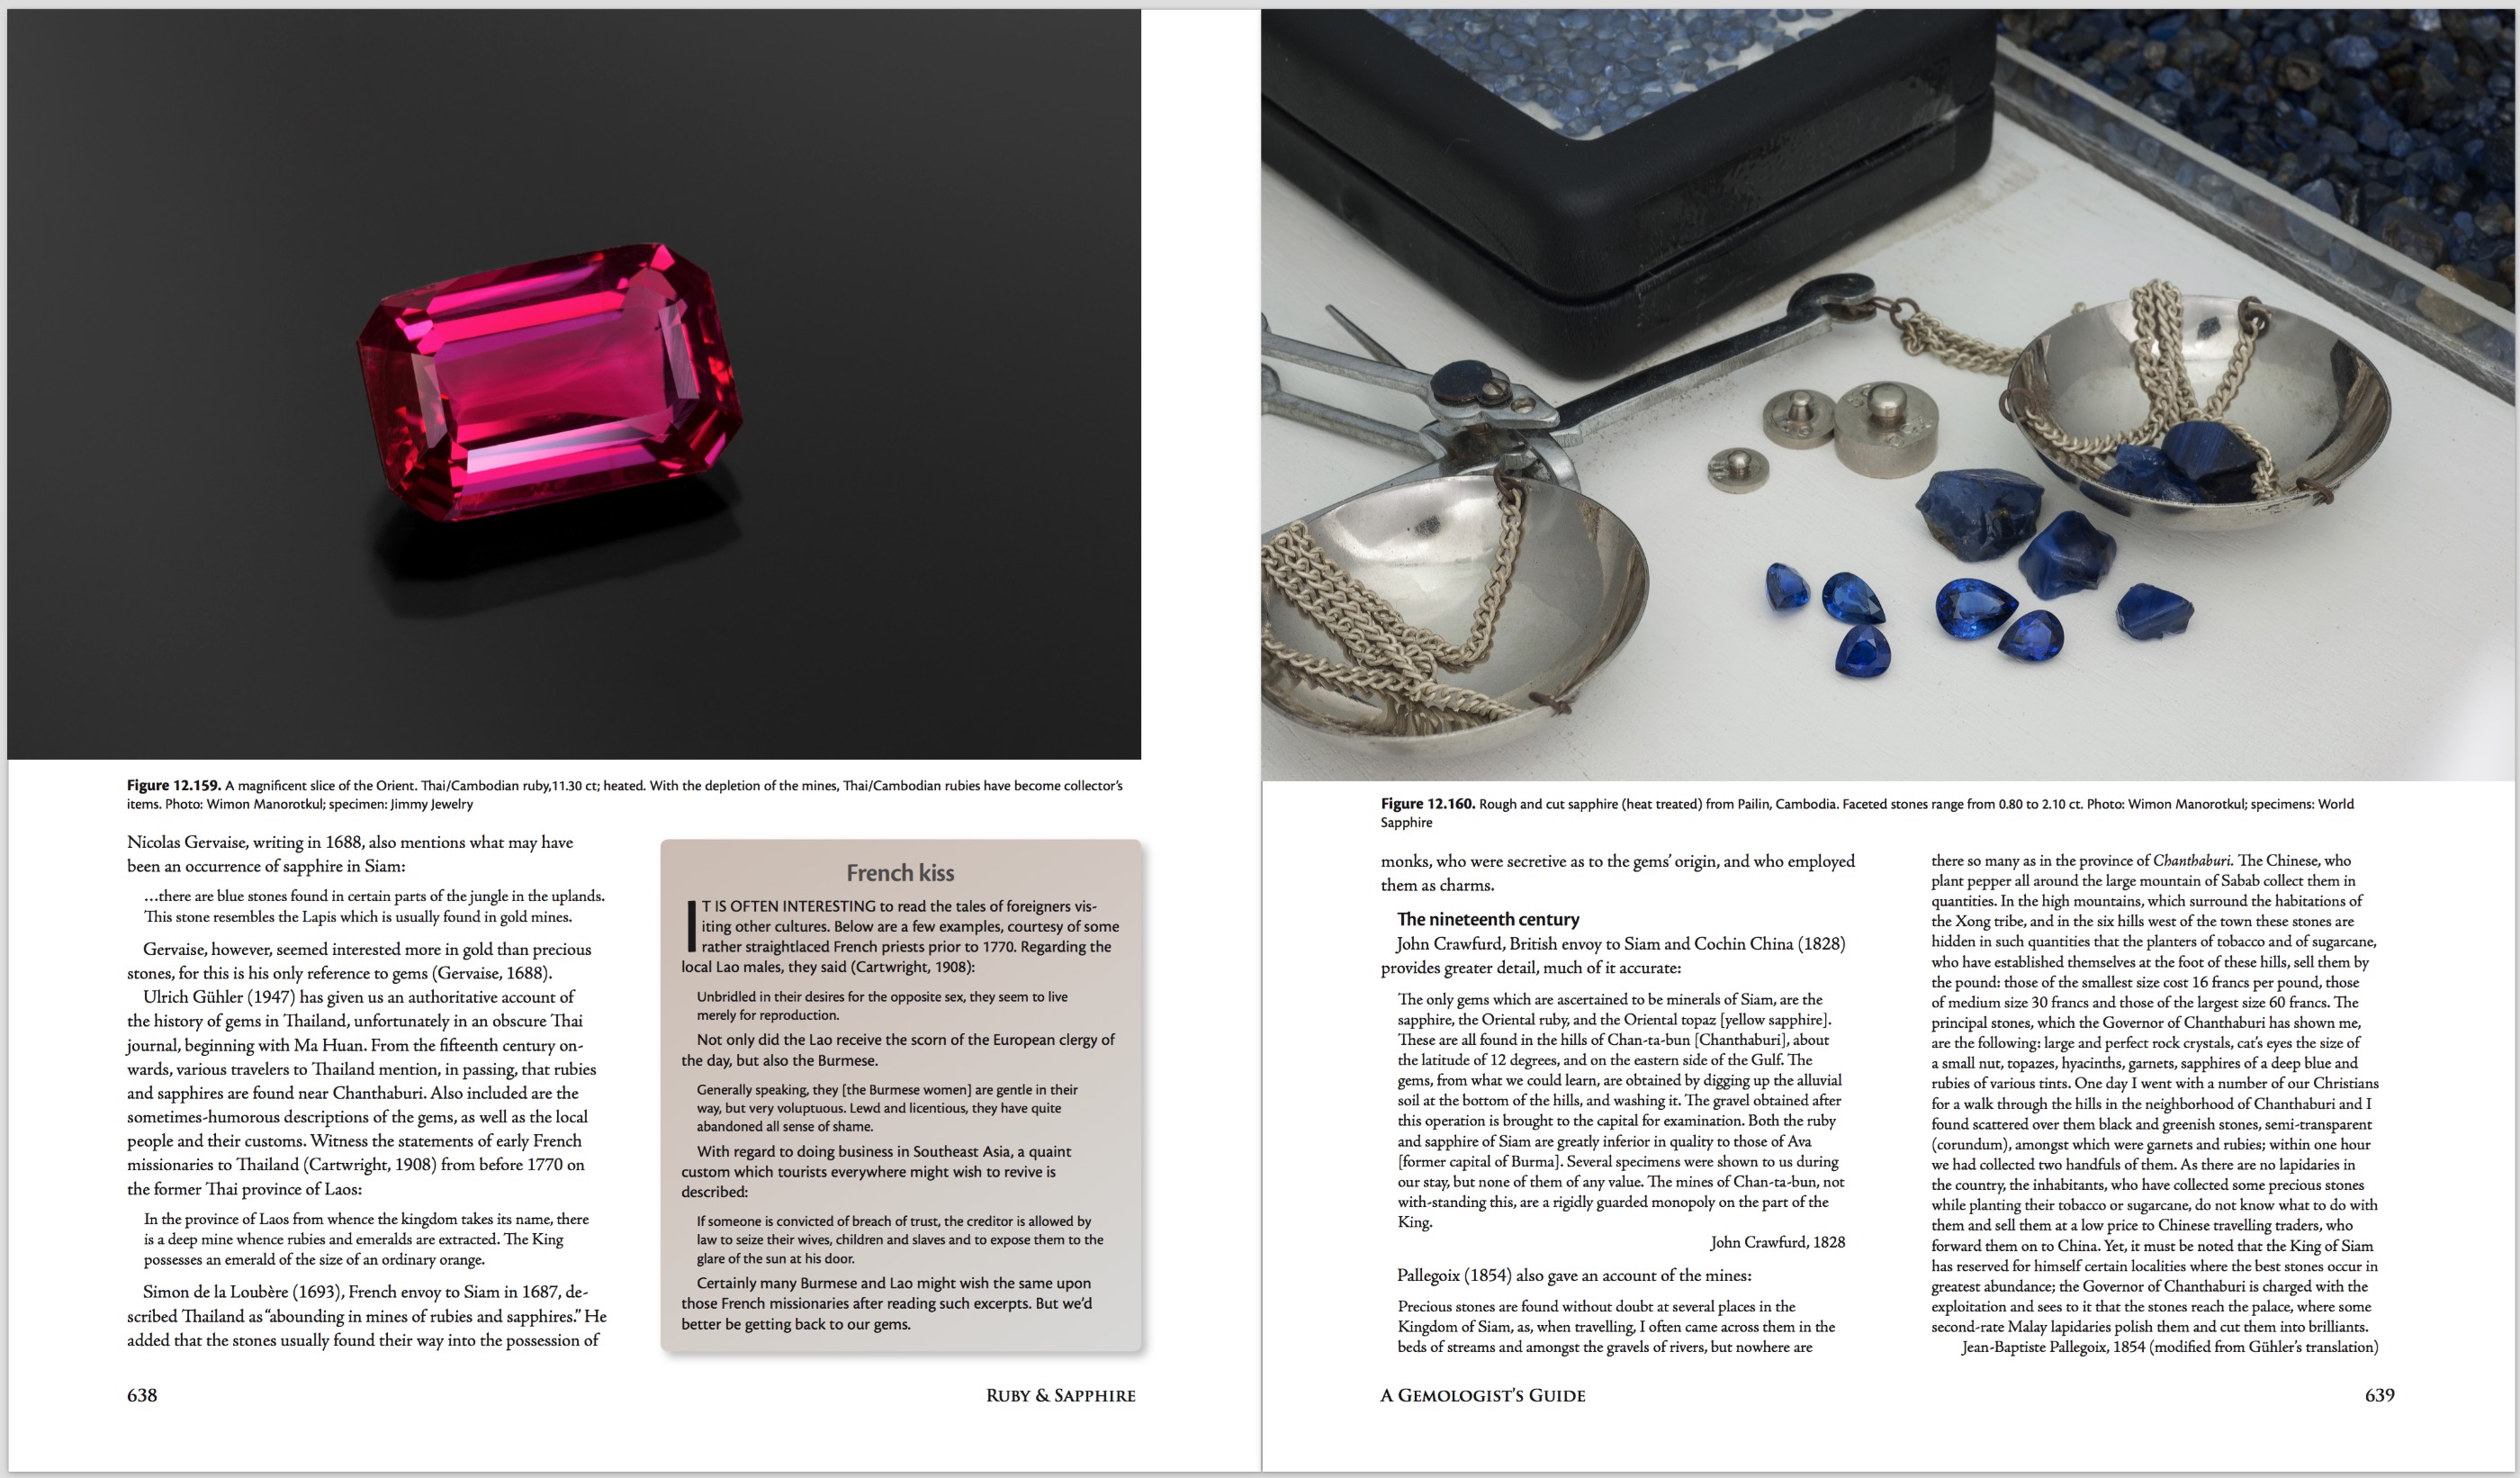 Ruby & Sapphire: A Gemologist's Guide – World Sources: Thailand/Cambodia